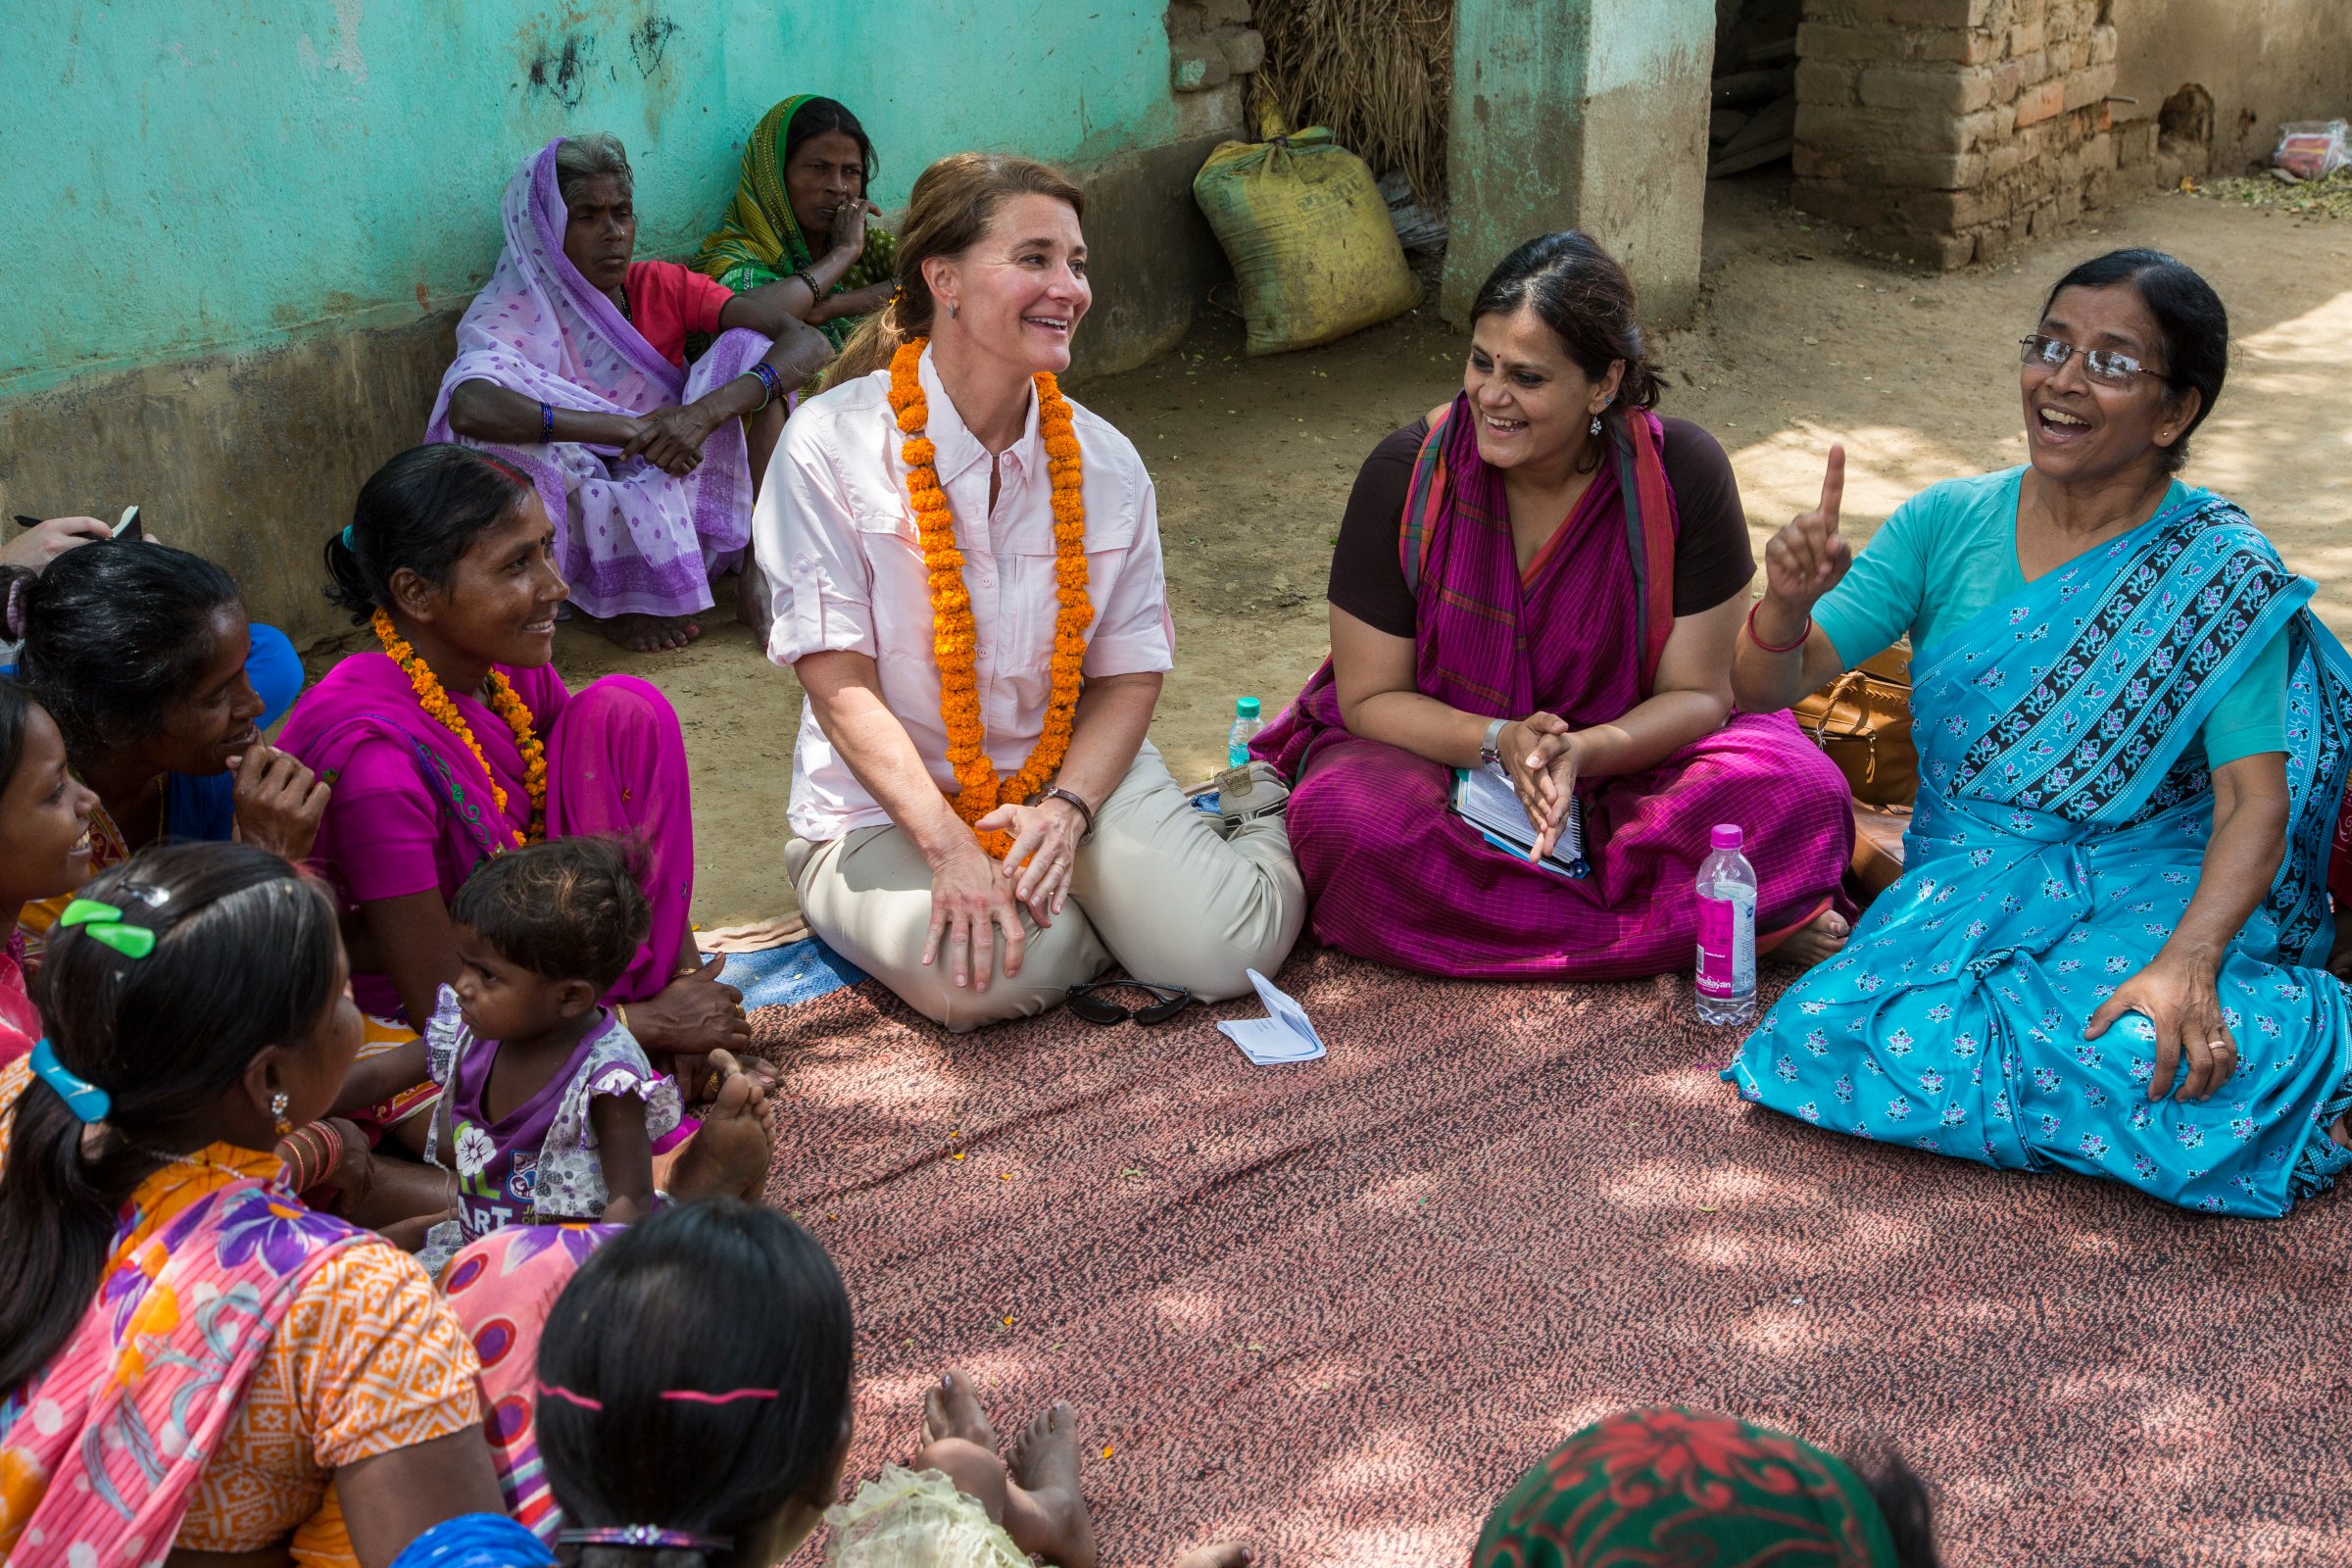 Melinda Gates during her interaction with women in Kothwa village in Danapur, Bihar, India, on April 18, 2015.She was accompanied by Sudha Varghese (light blue sari). Seated on Melinda Gates' right was Rita Devi (dark pink sari) and on her left was Yamini Atmavilas of the Gates Foundation.Sudha Varghese's Nari Gunjan works with women and girls of Dalit communities in this village.